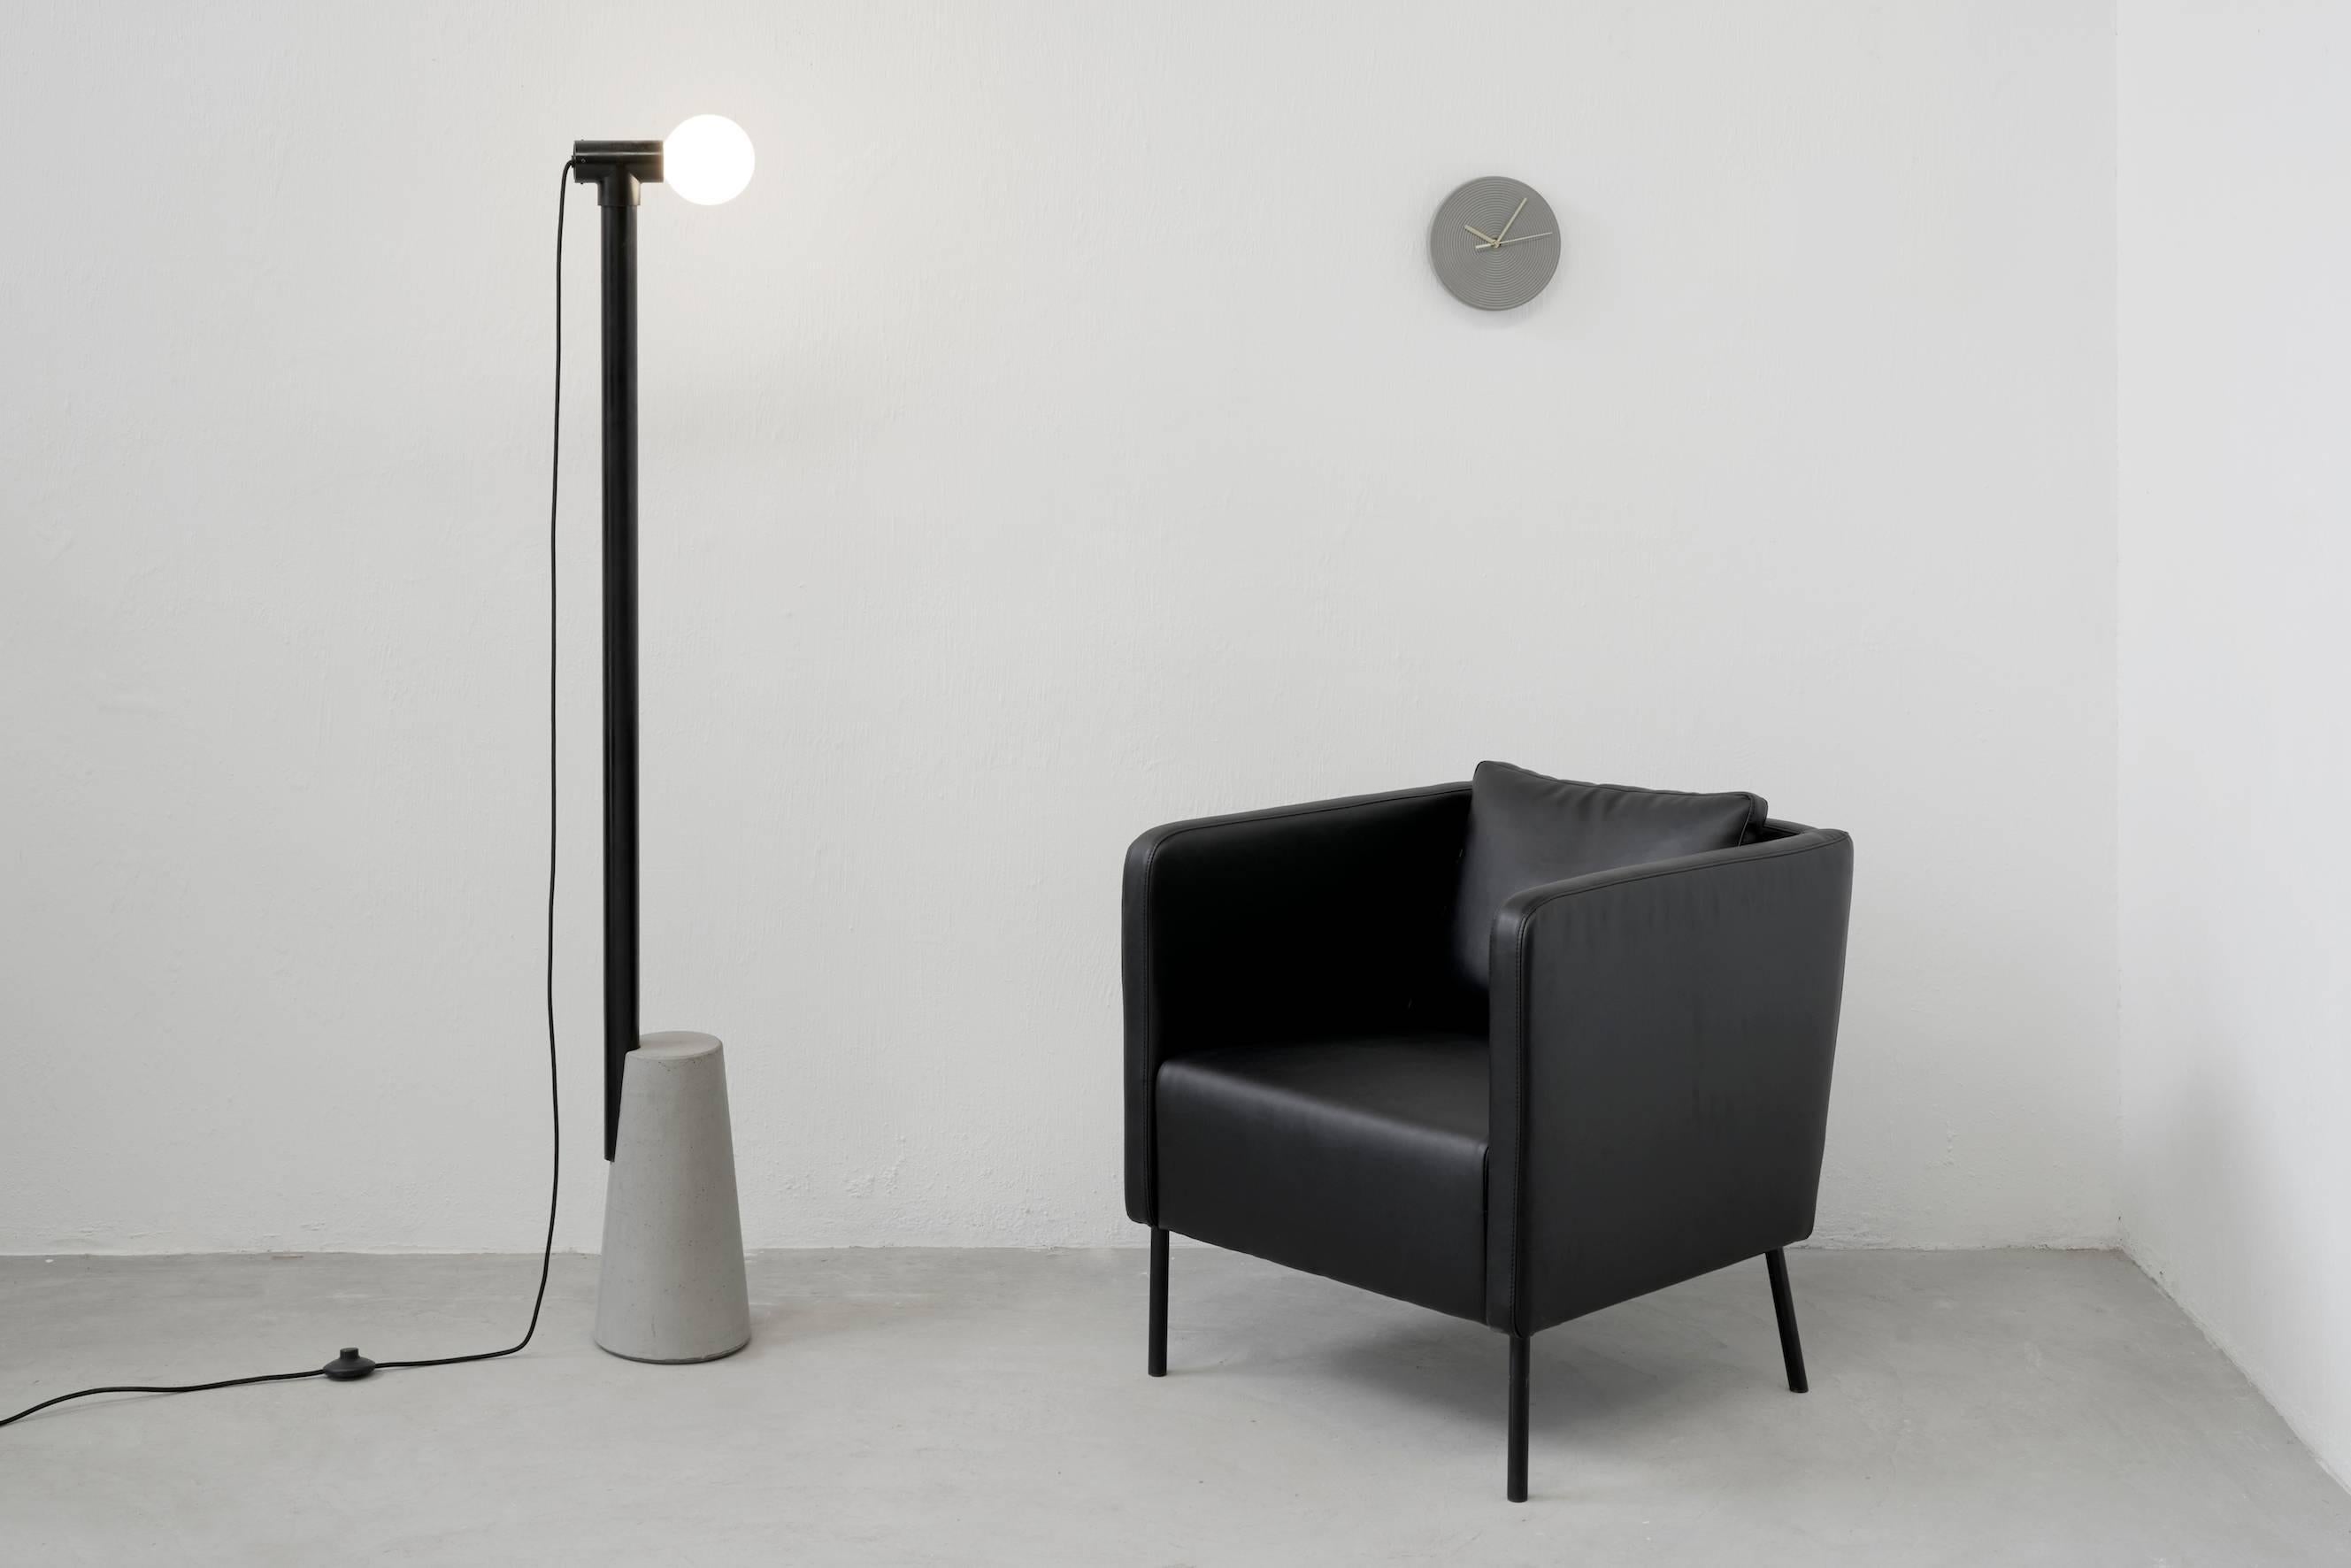 Chinese Liao, Concrete Floor Lamp - Industrial and Minimalism style